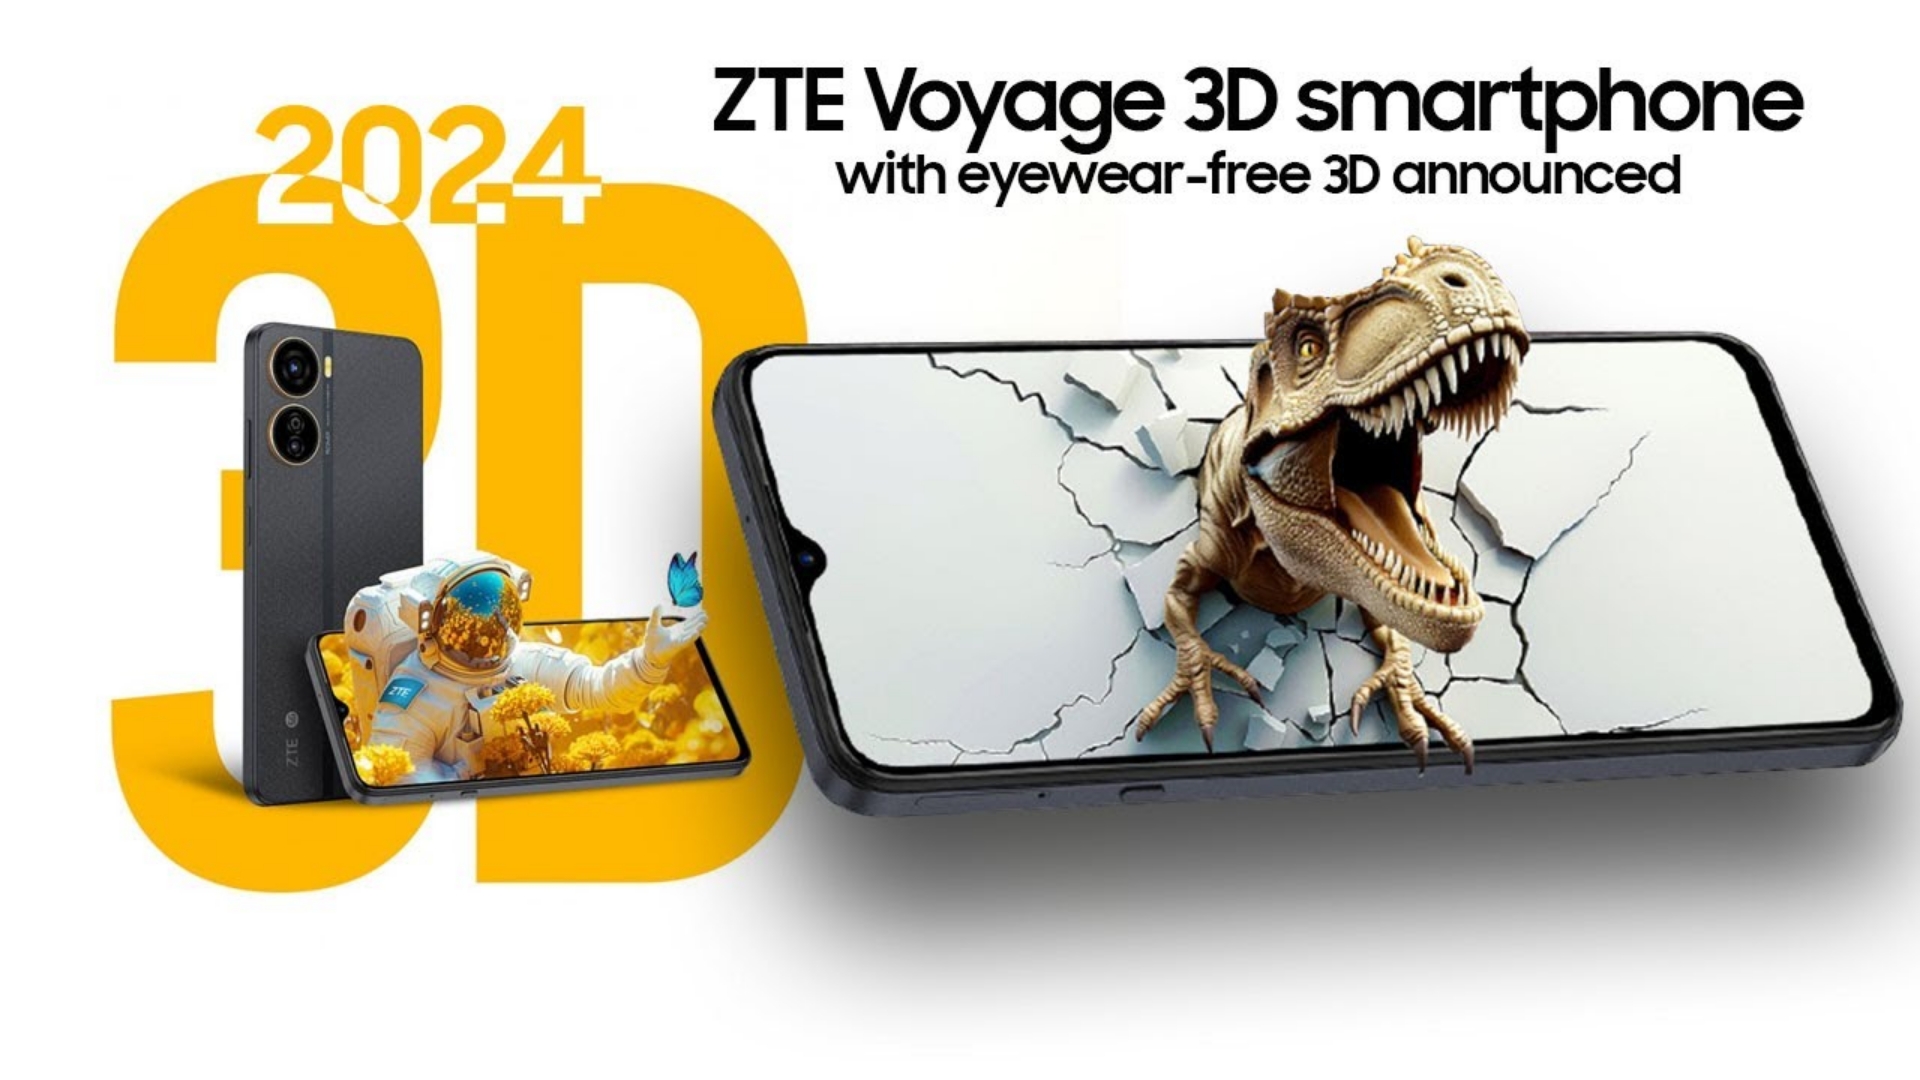 The world's first AI 3D smartphone for naked eyes is ZTE Voyage 3D.